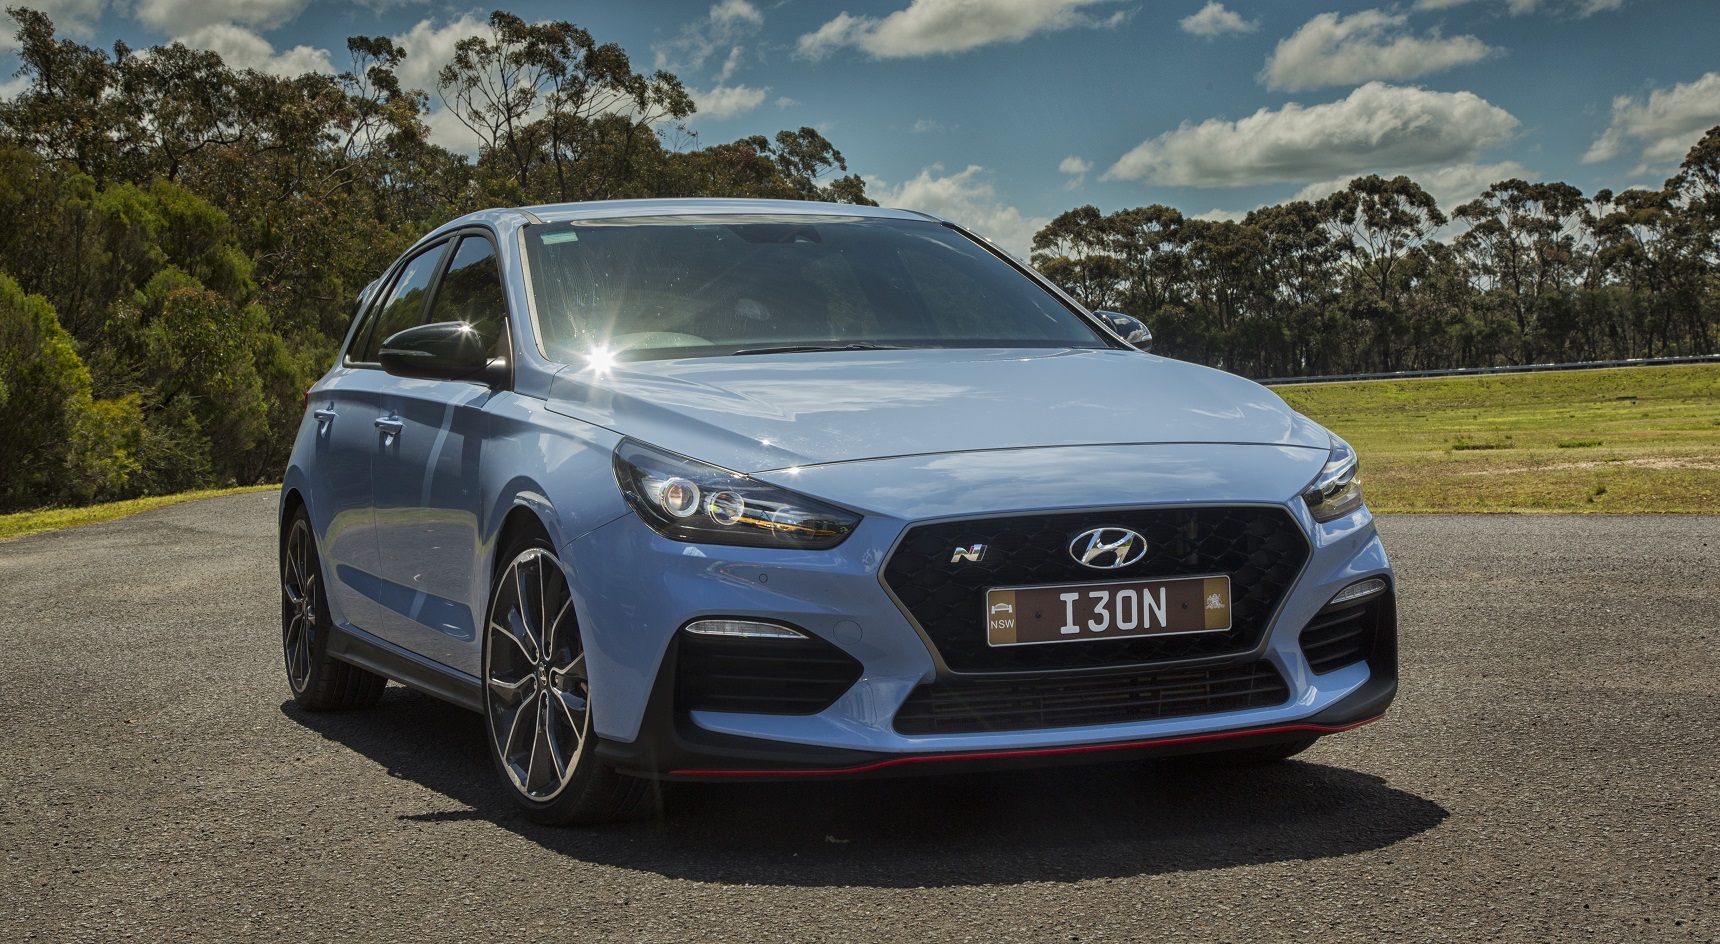 The i30 N rates highly compared to some of its hard-riding Euro rivals.